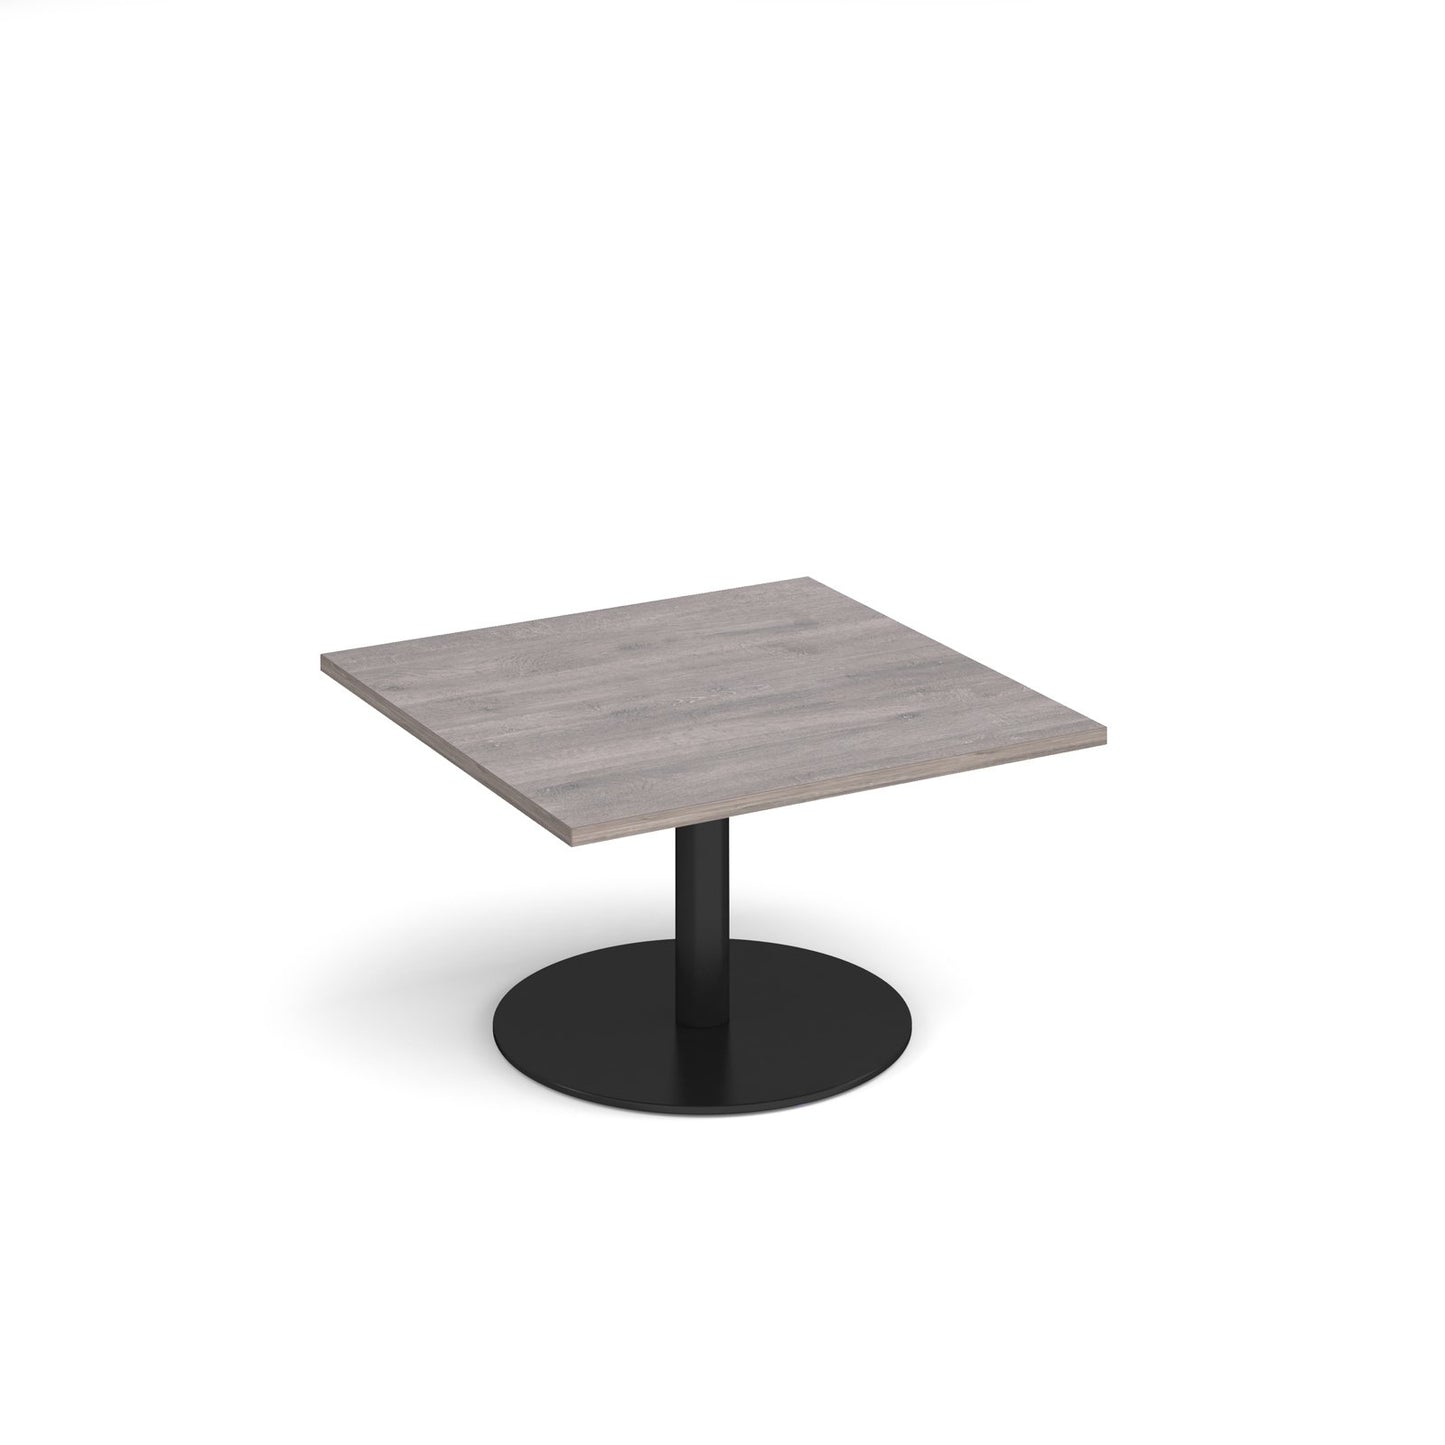 Monza square coffee table with flat round base